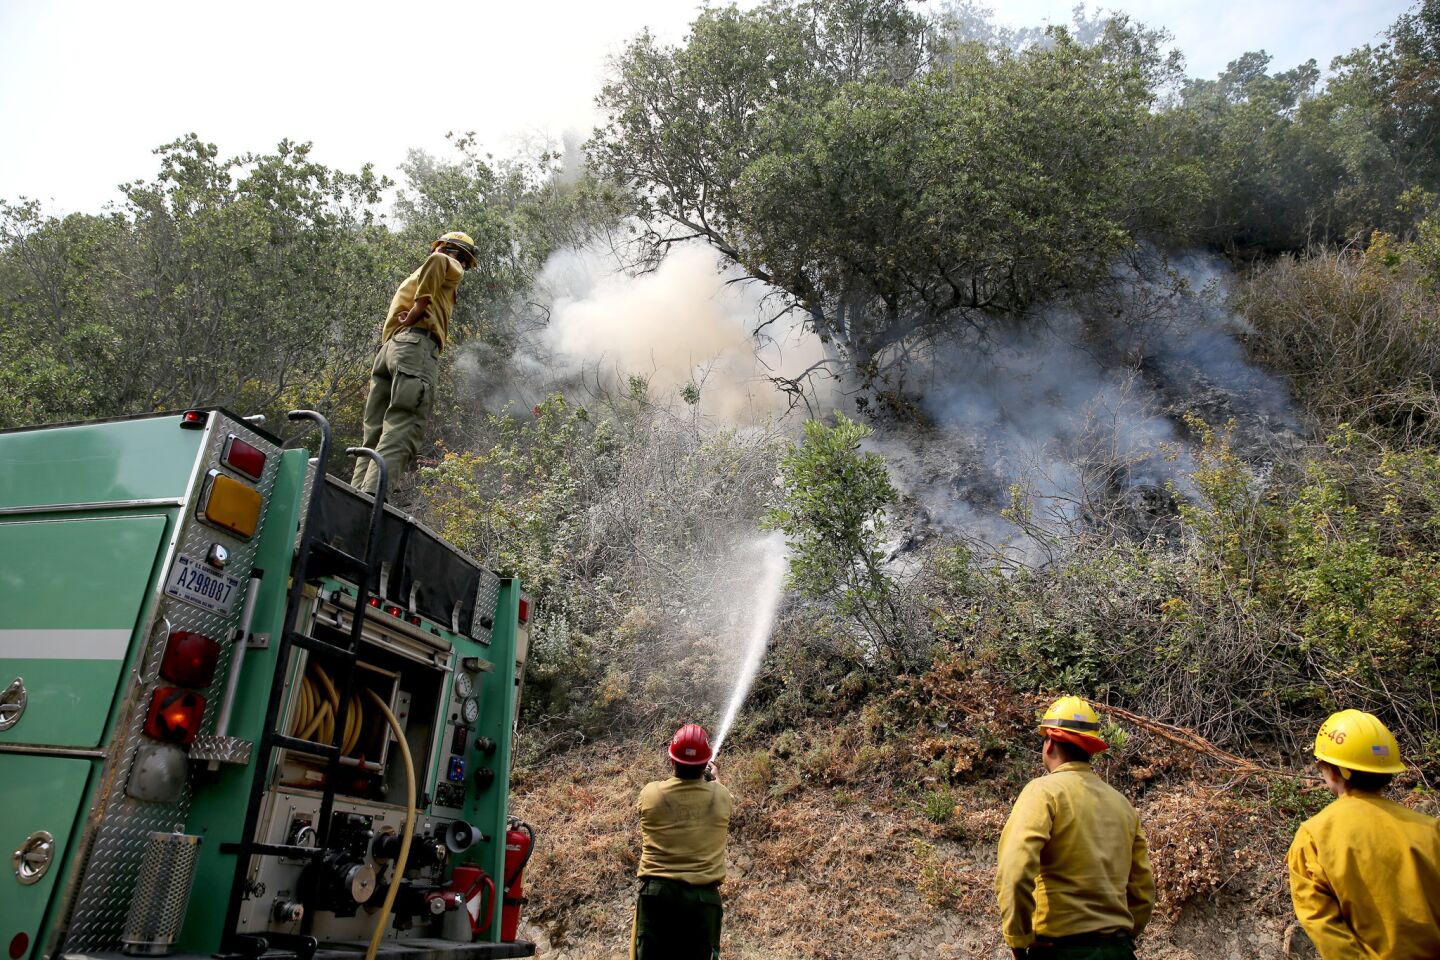 U.S. Forest Service firefighters put out spot fires from the Whittier fire along State Route 154 in the Los Padres National Forest near Lake Cachuma.